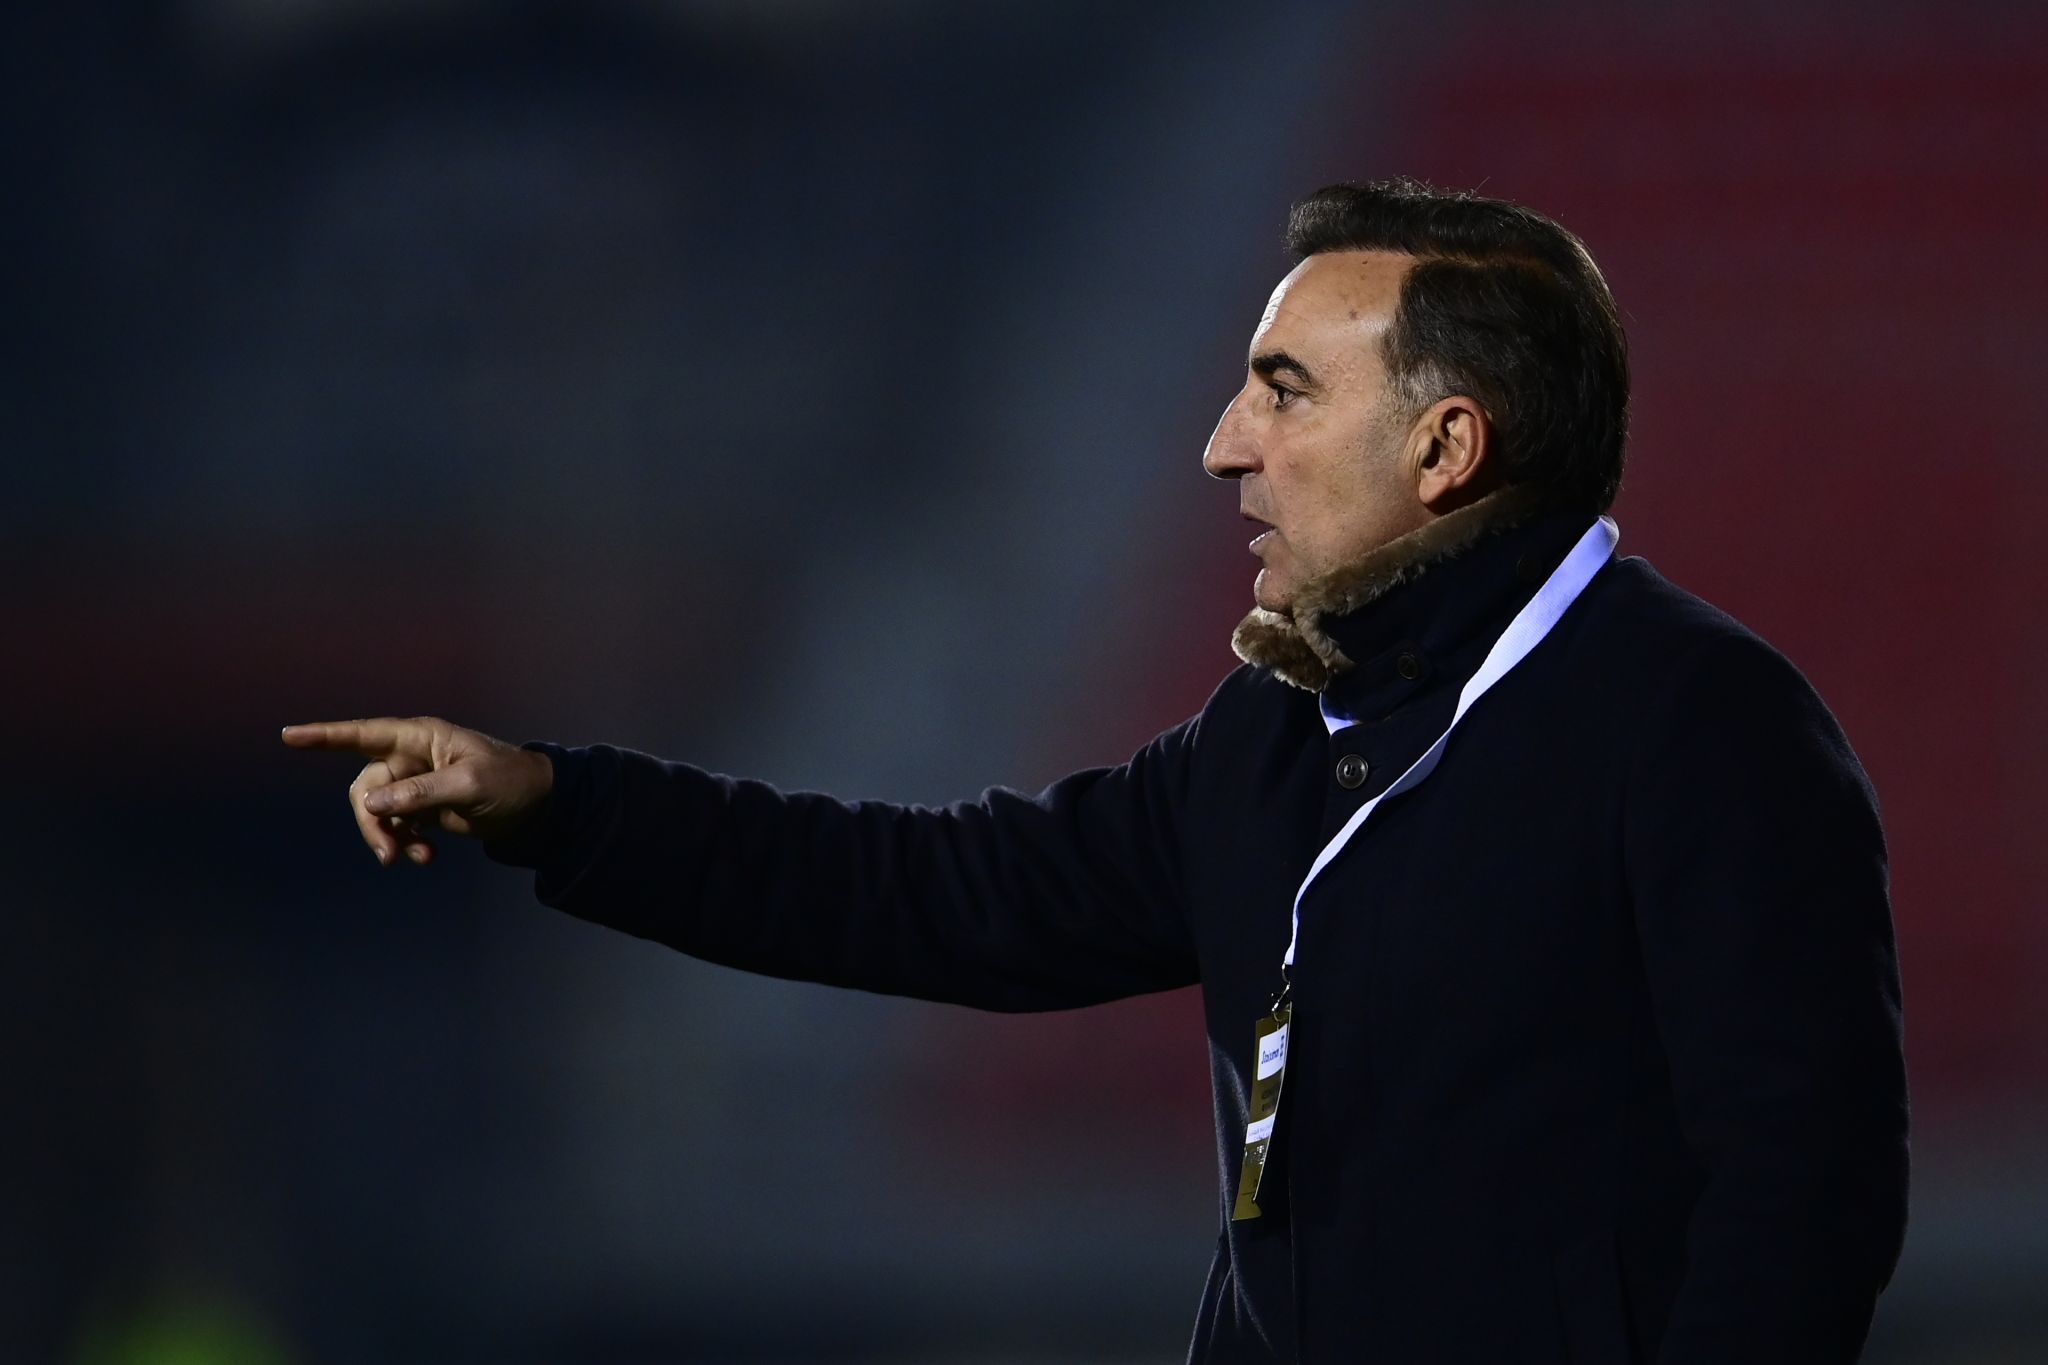 Carlos Carvalhal: “We have overcome the difficulties, we are evolving as a team”